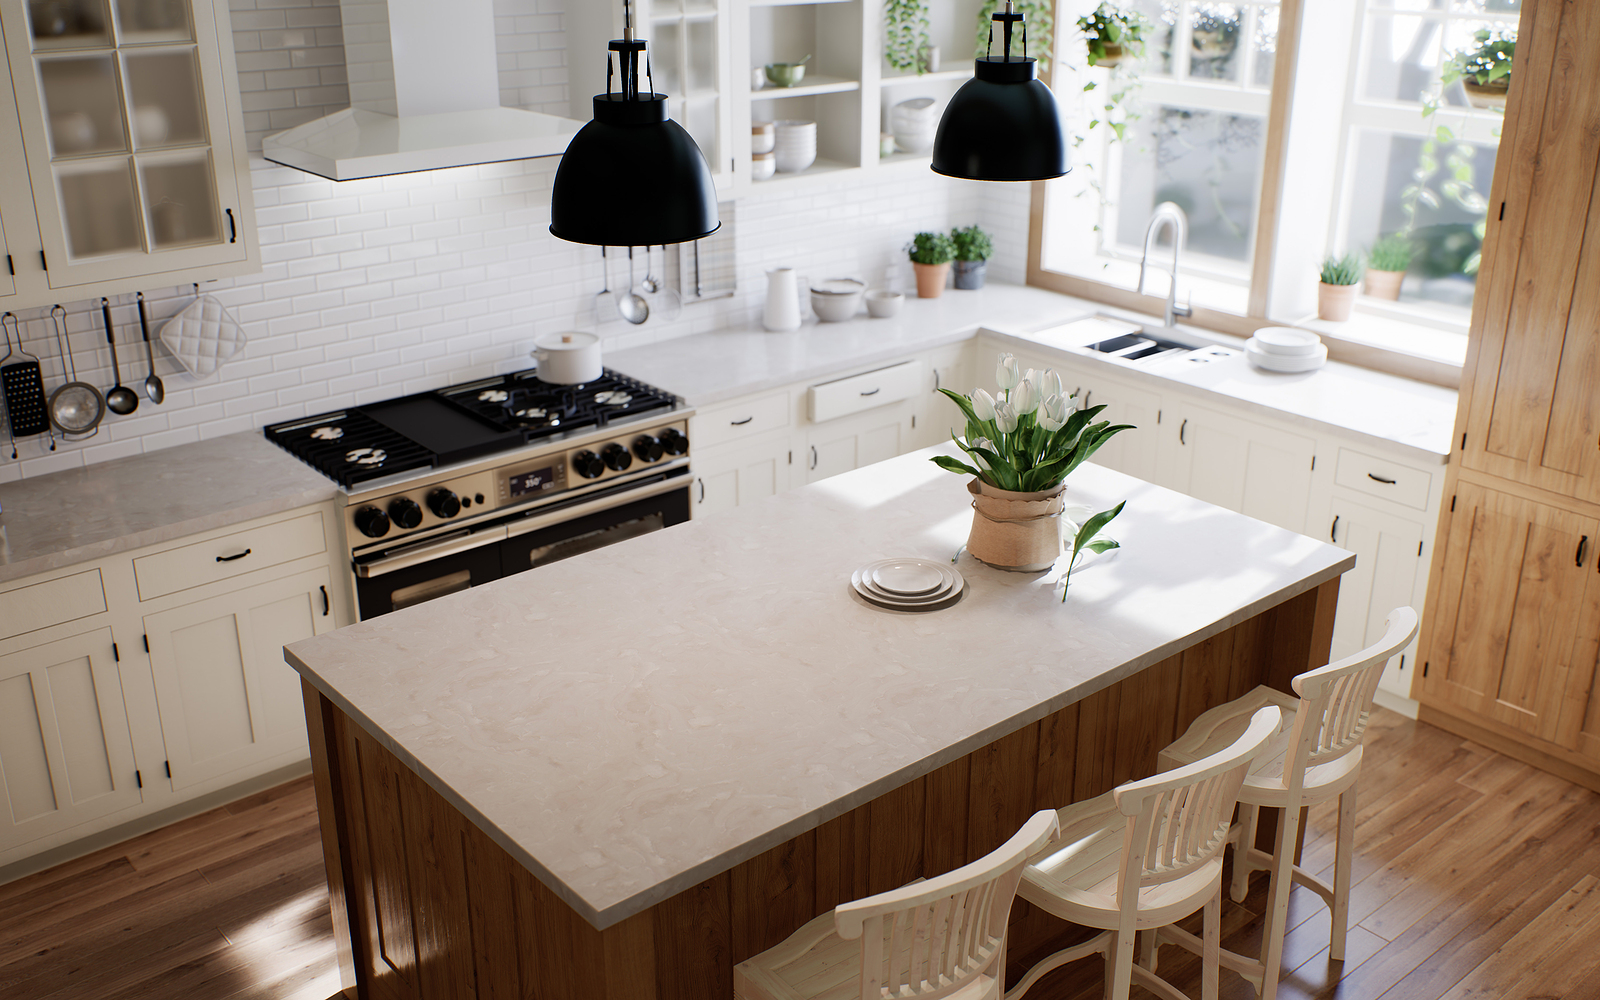 The Interior Of A Large U-shaped Kitchen With A Wooden Front And